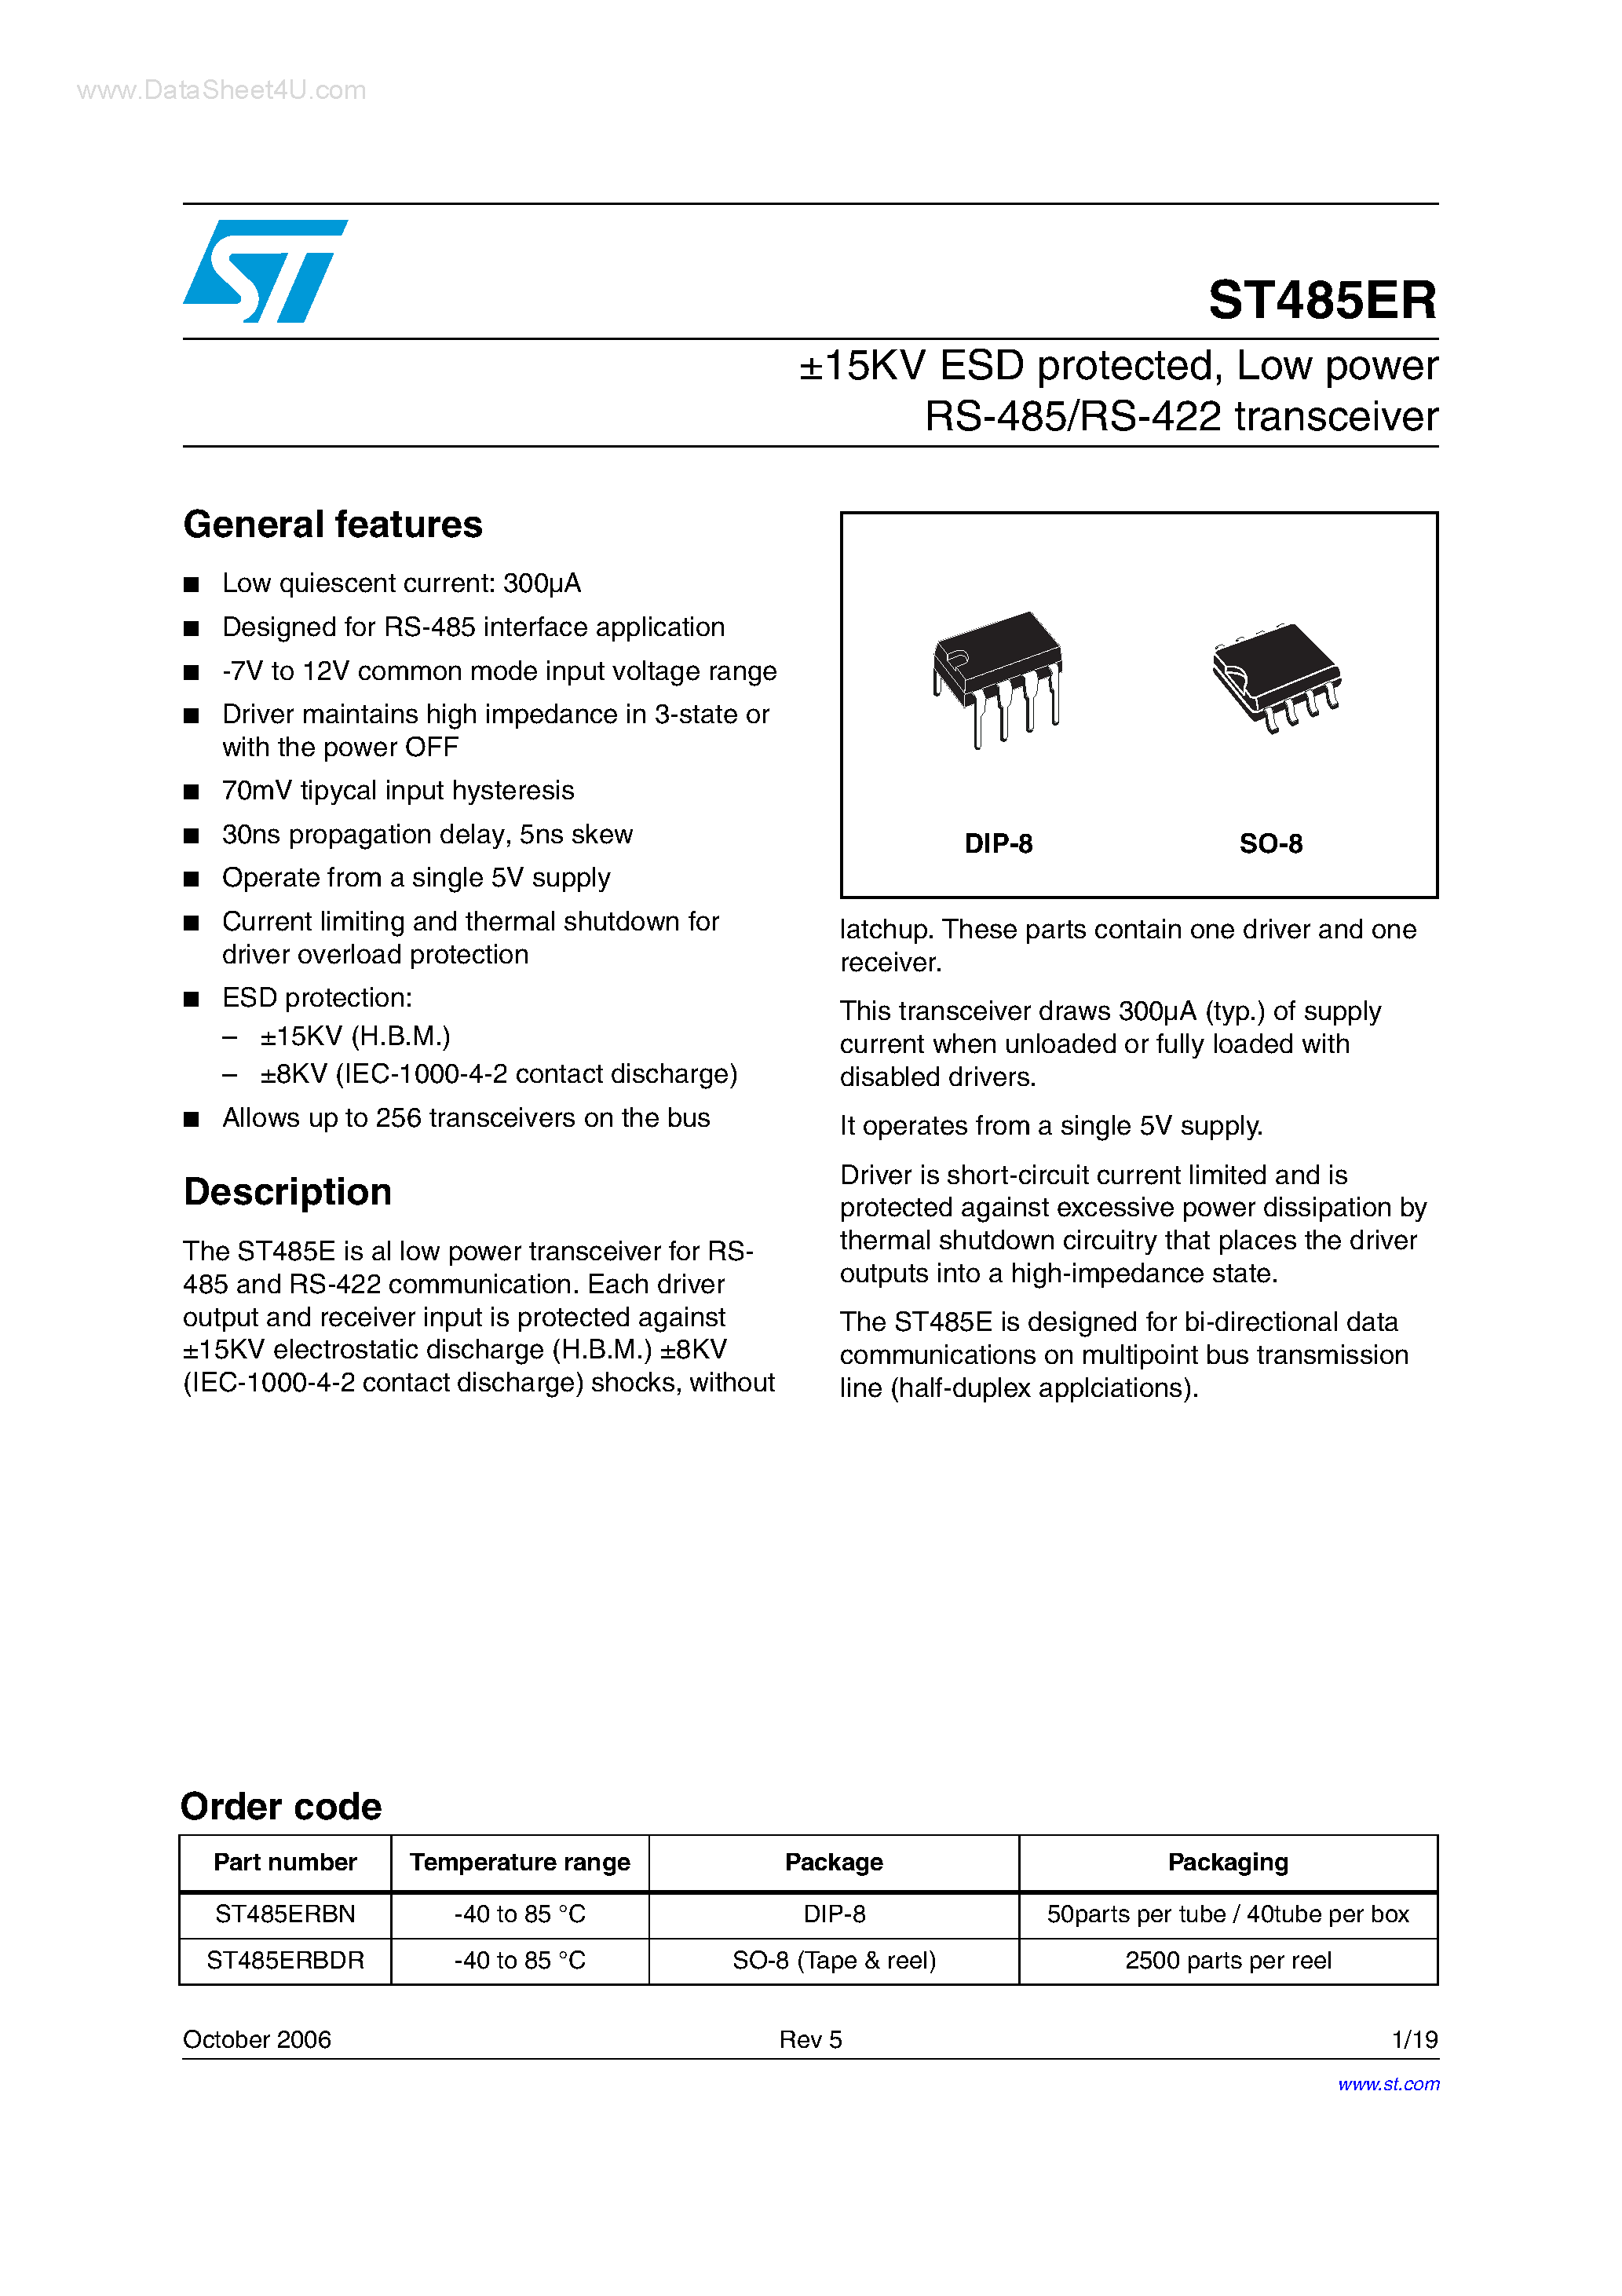 Datasheet ST485ER - Low power RS-485/RS-422 transceiver page 1